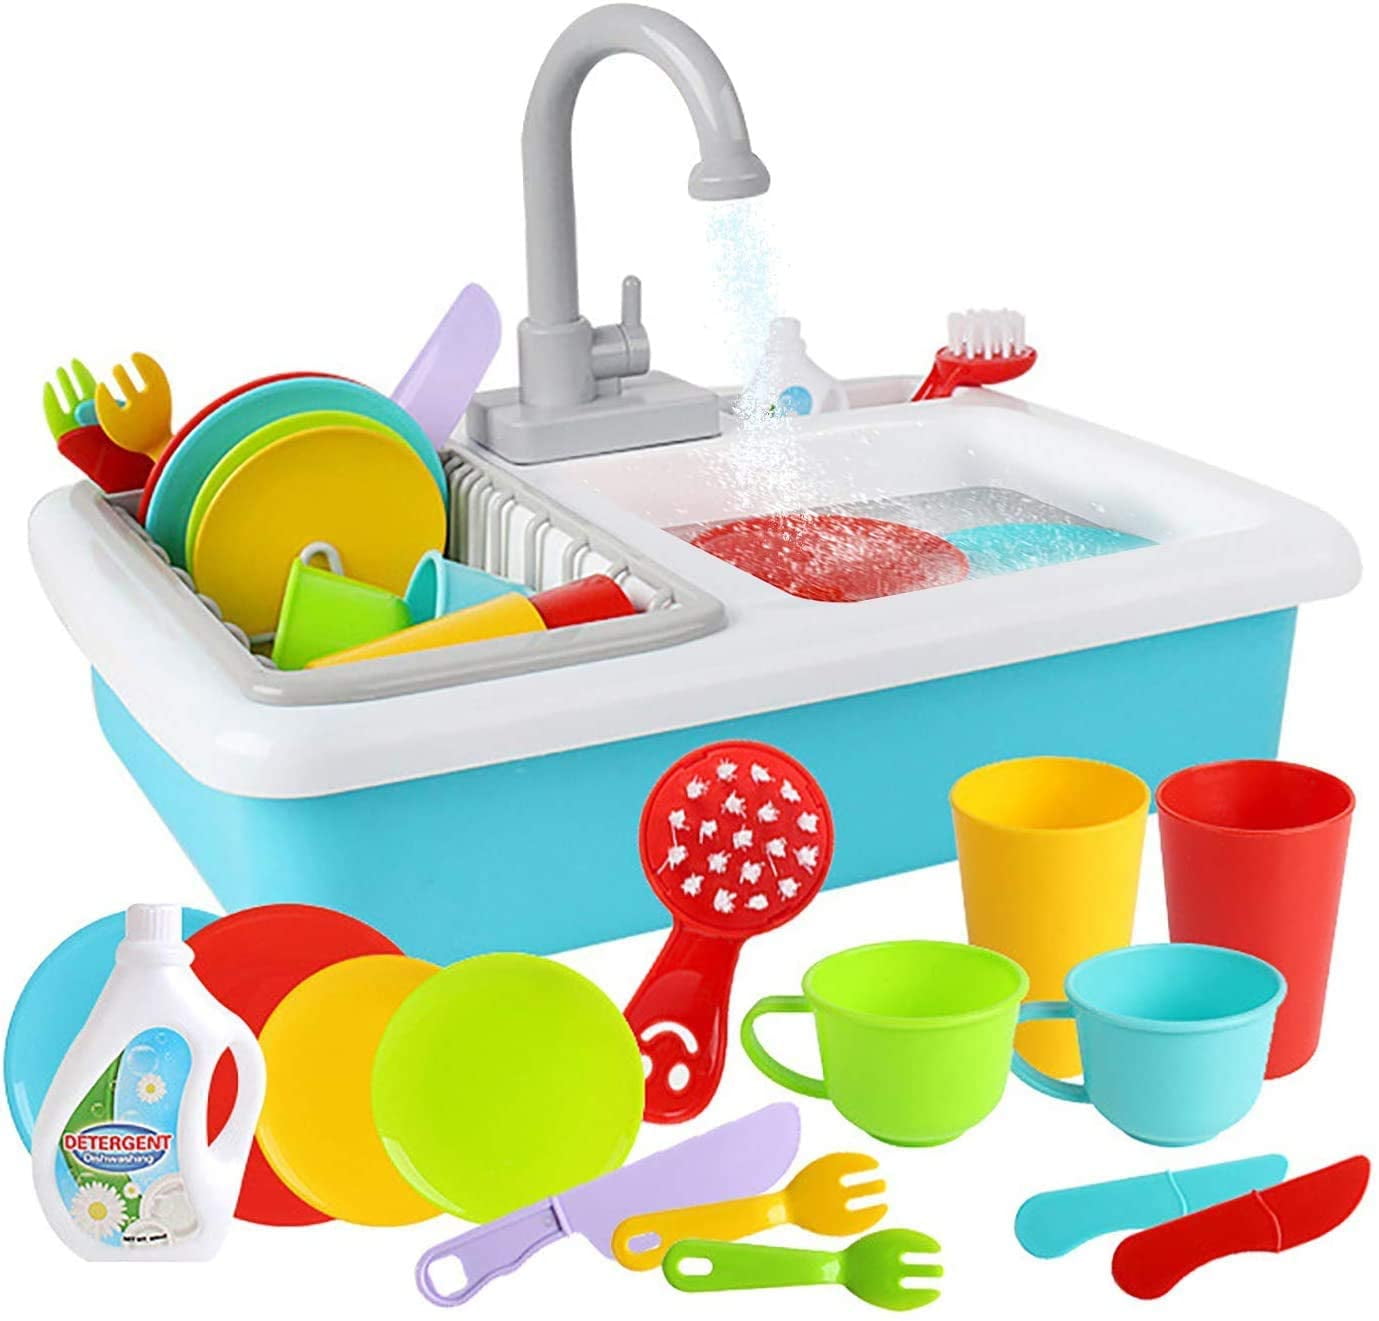 Buy SPLASHFUN Wash-up Kitchen Sink Play Set with Running Water Pretend Play  Kitchen Toy Set with Working Faucet and Color Changing Play Cups and  Accessories.